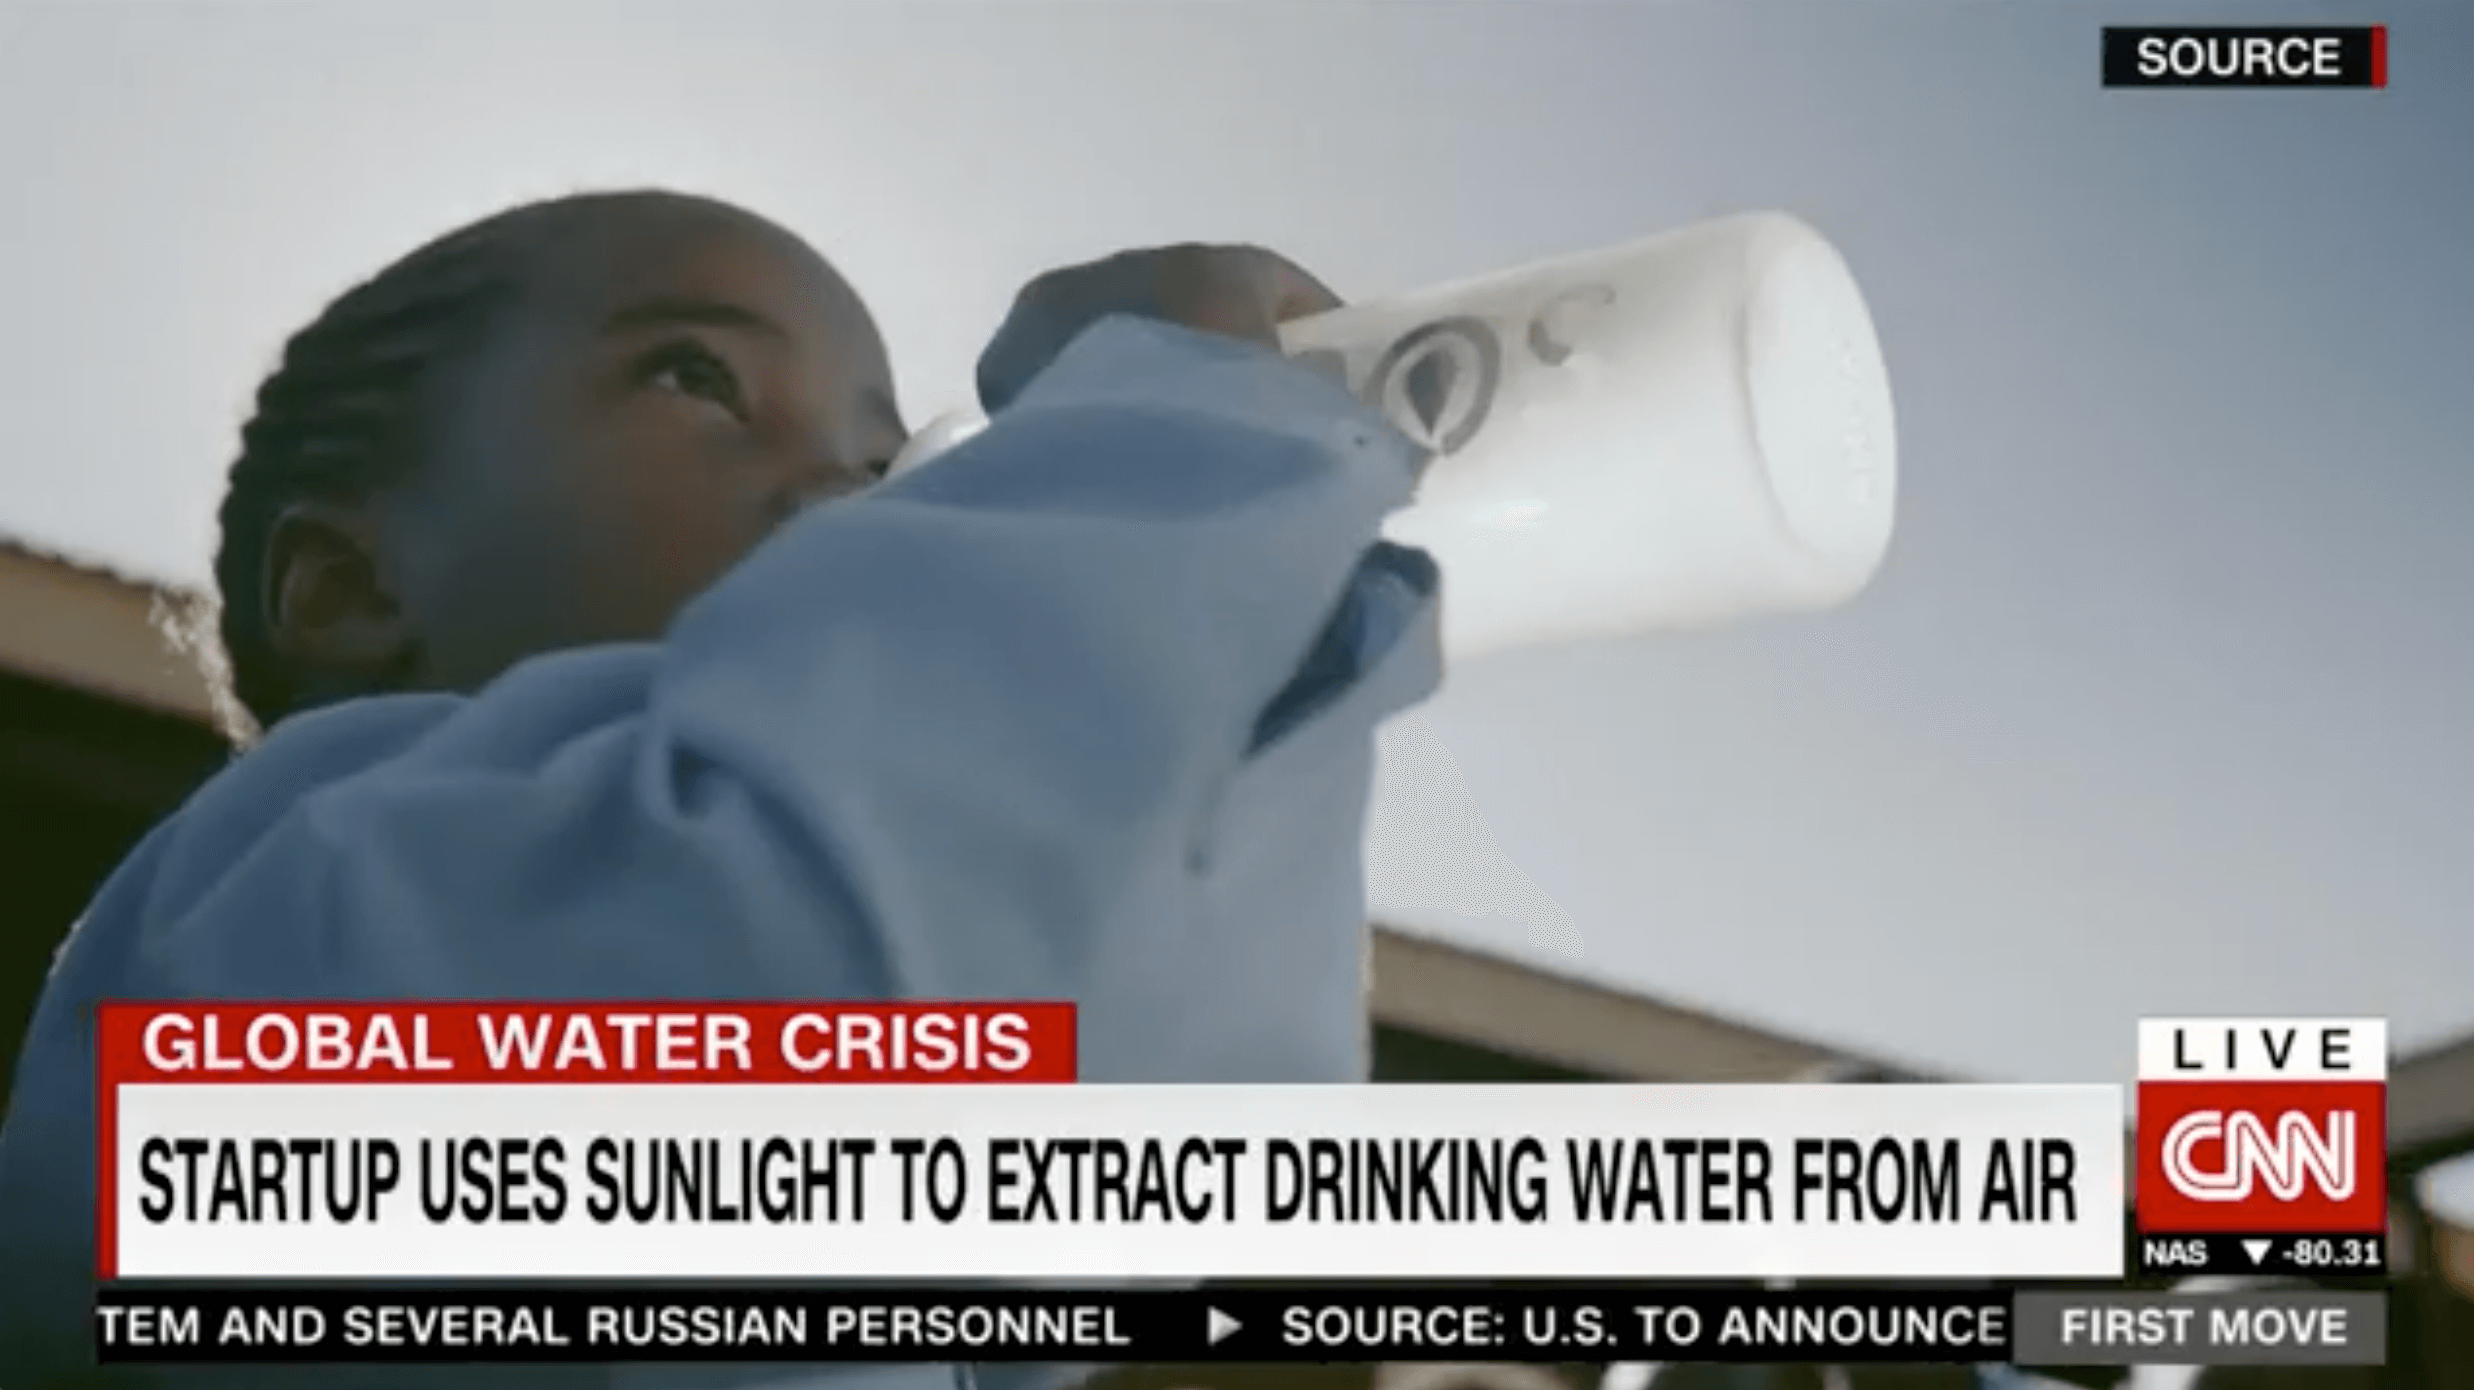 Startup uses sunlight to extract drinking water from air